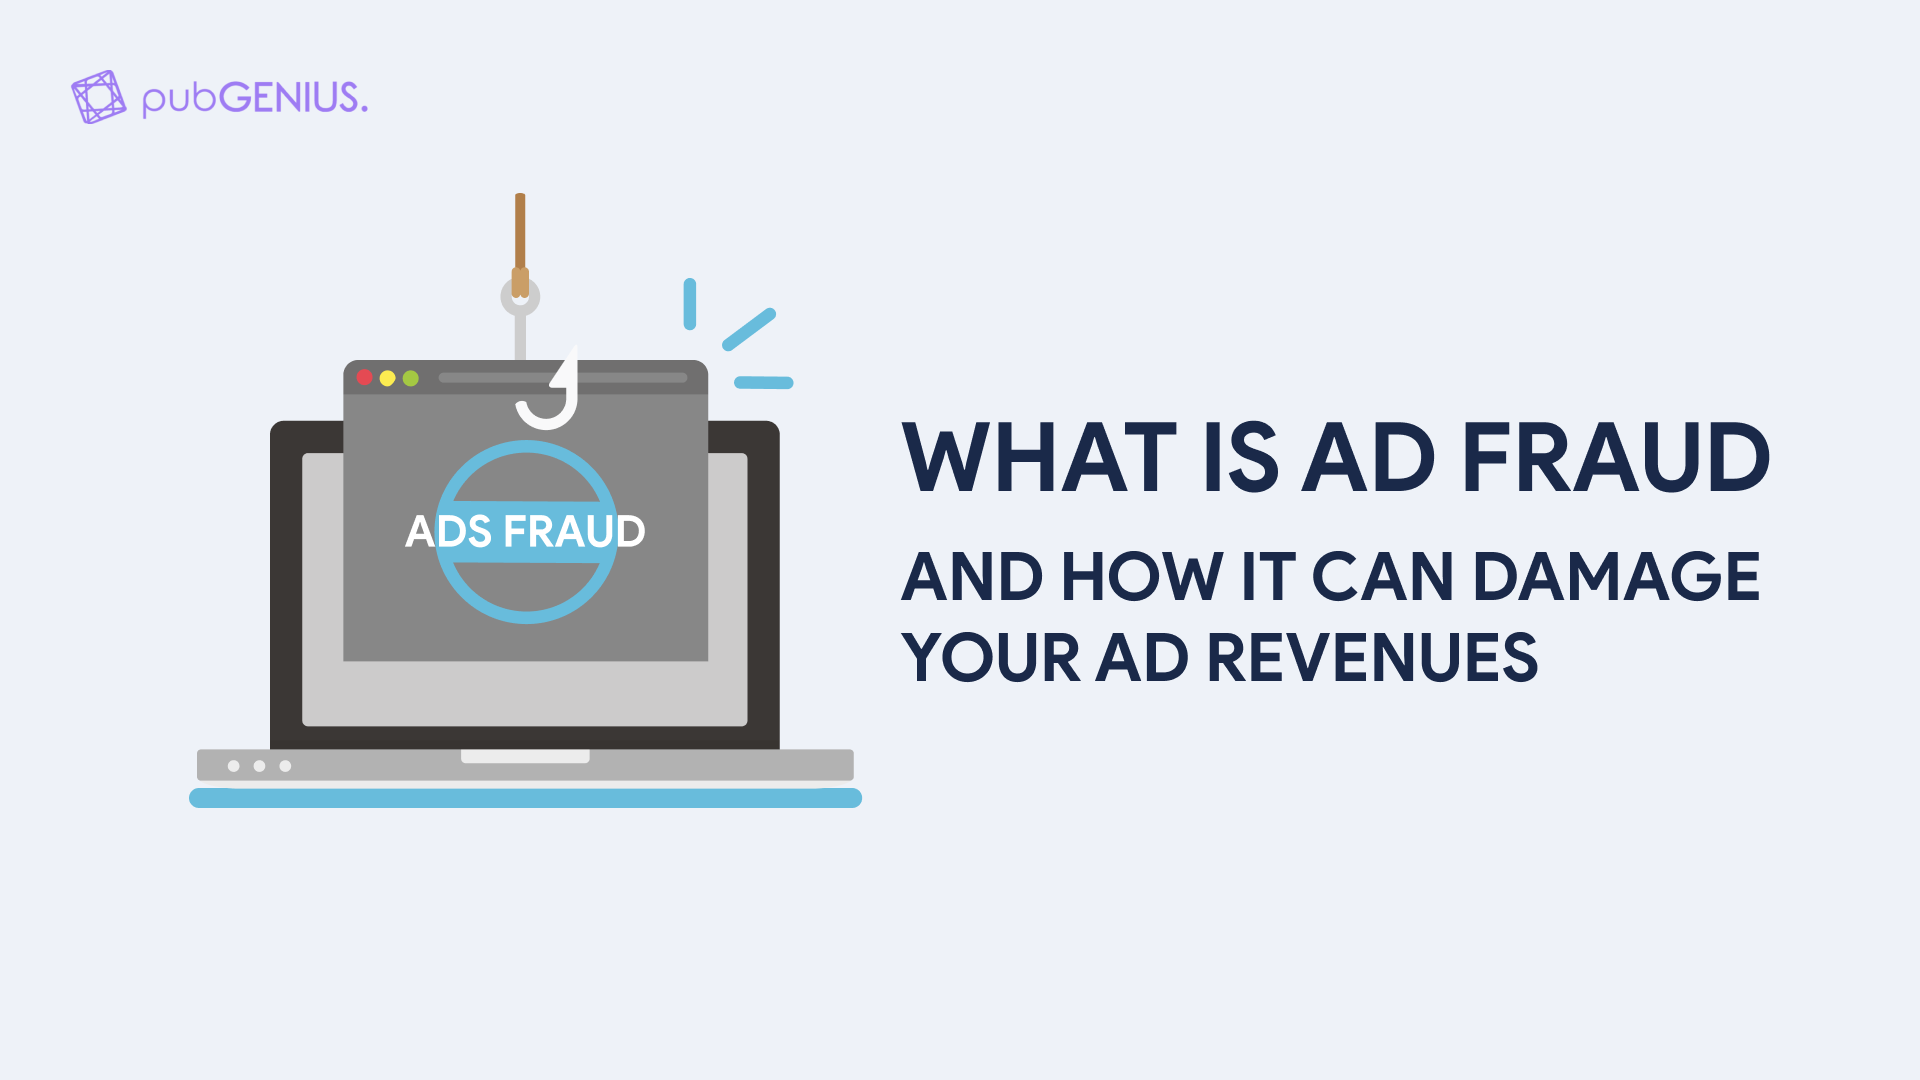 hat is Ad Fraud and how it can damage your ad revenues